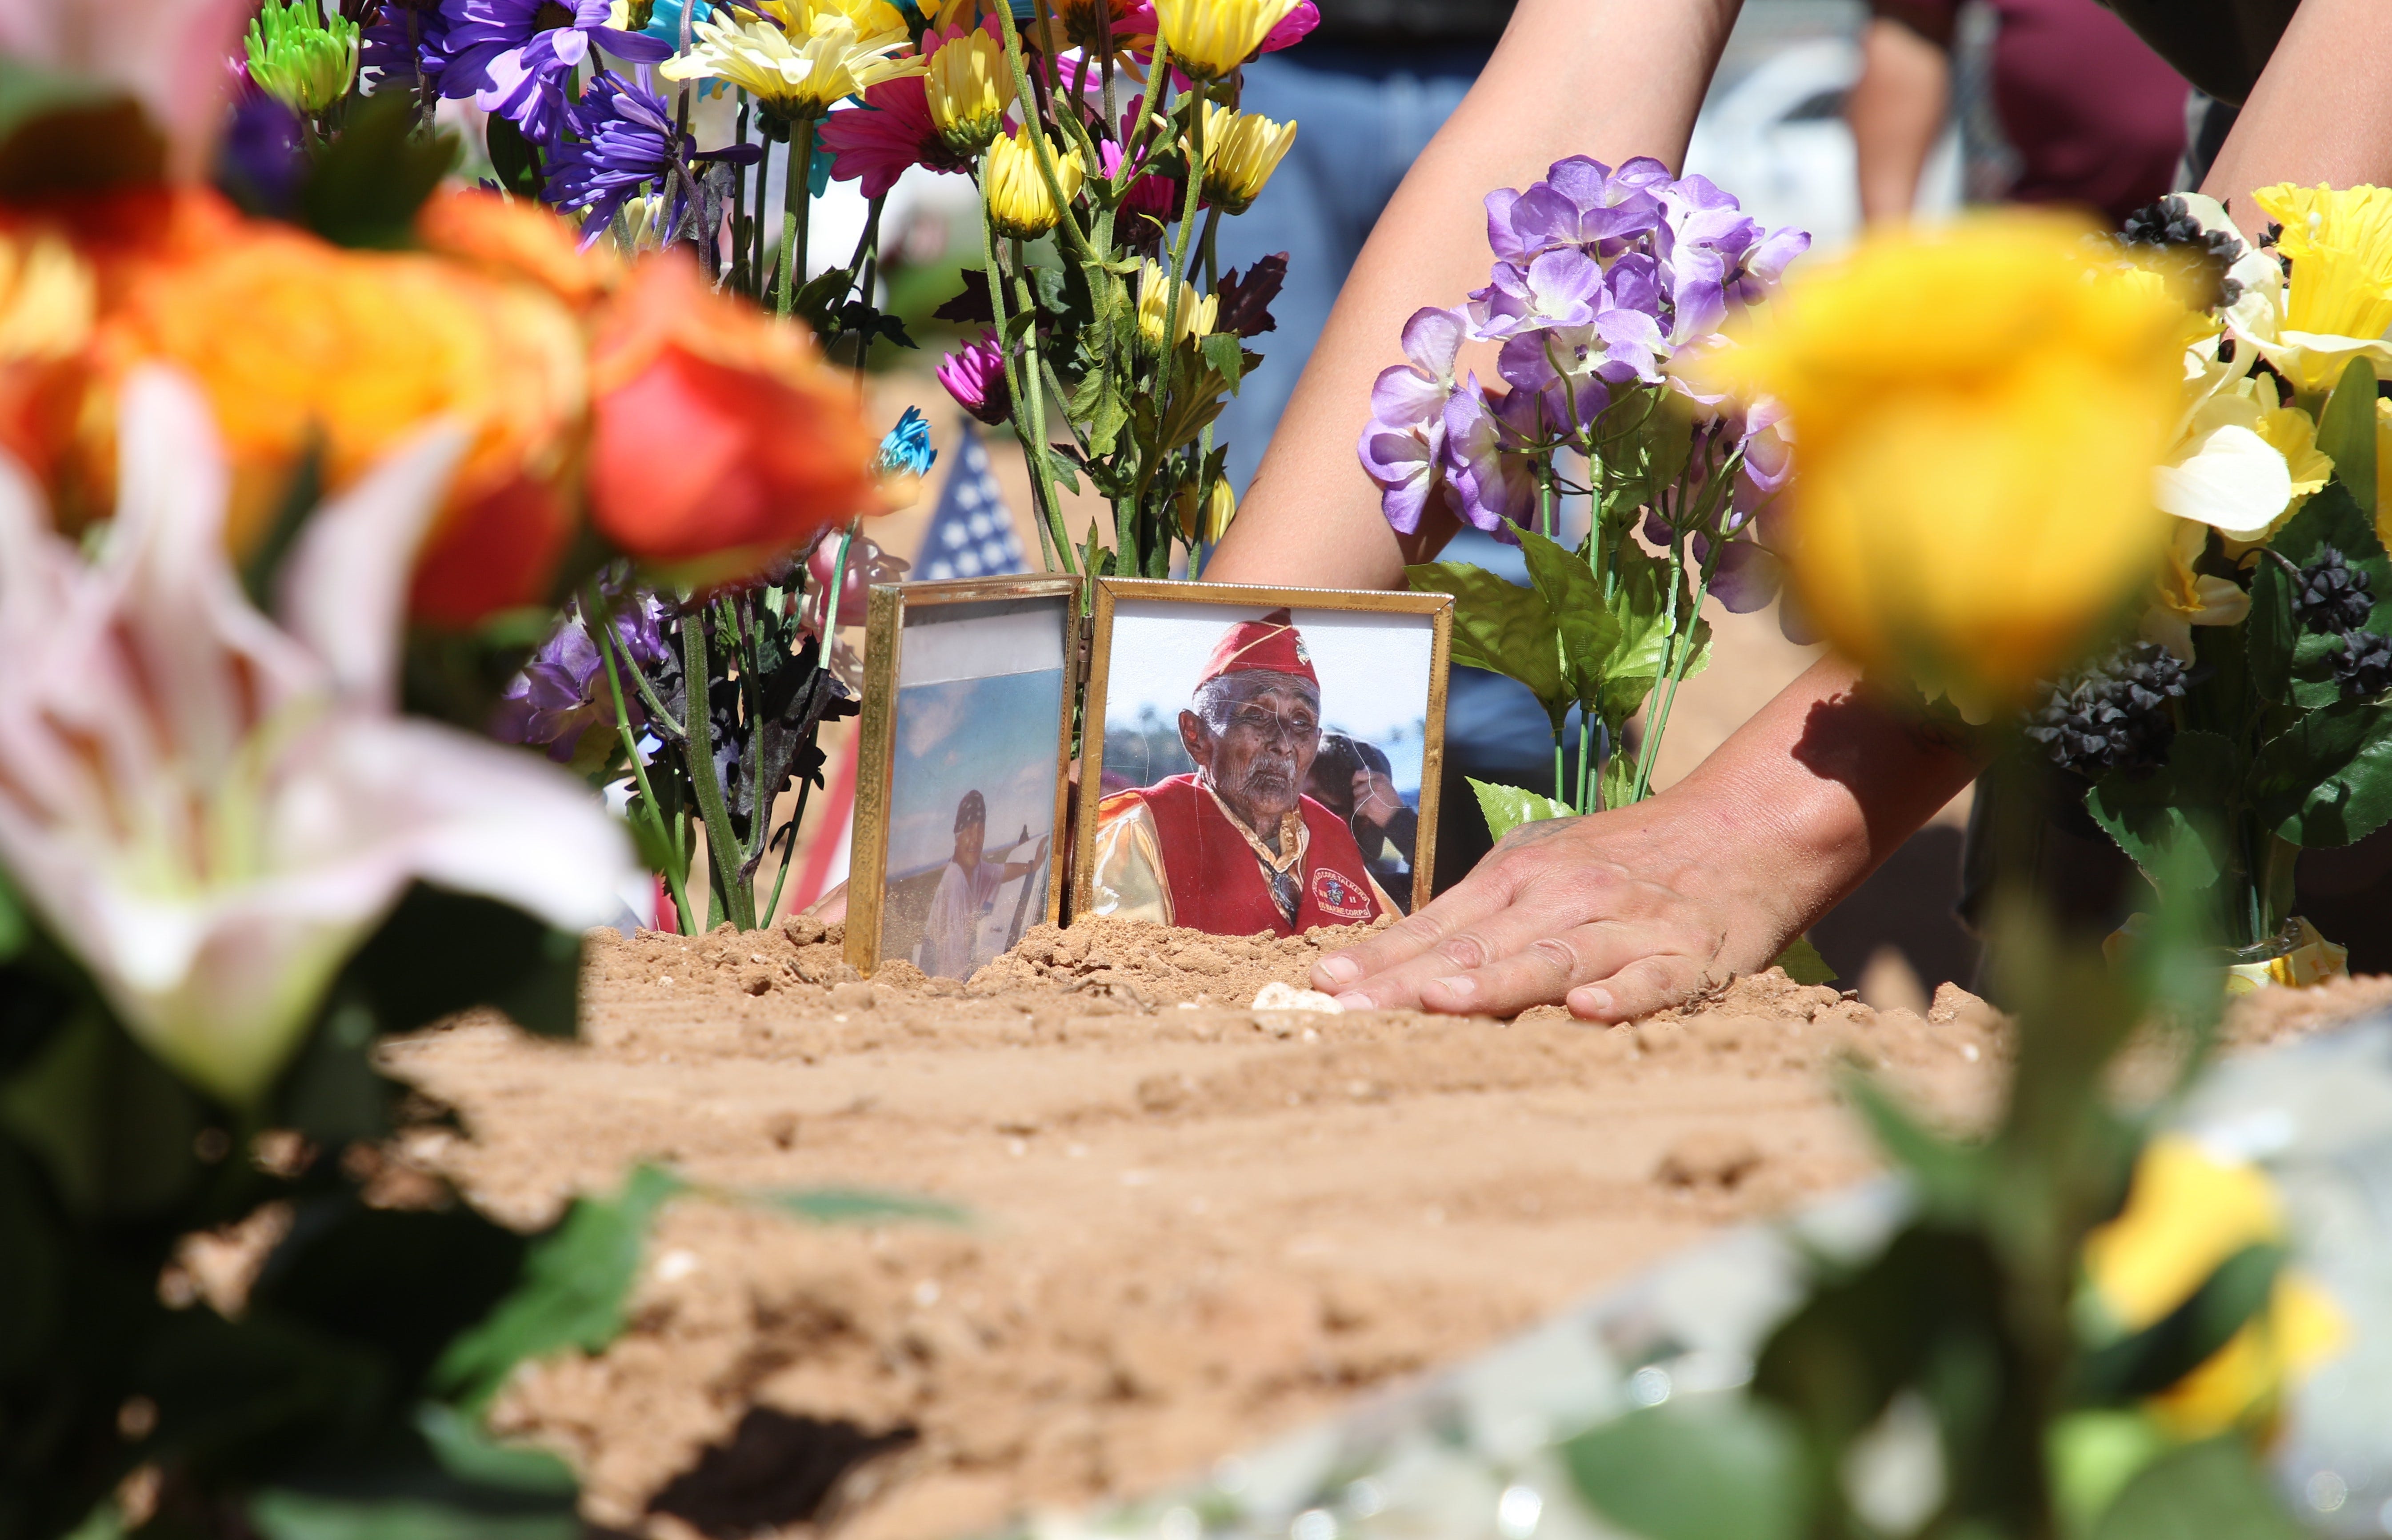 A photo of Navajo Code Talker William Tully Brown Sr. is placed on his grave at the Fort Defiance Veterans Cemetery on June 6 in Fort Defiance, Ariz.